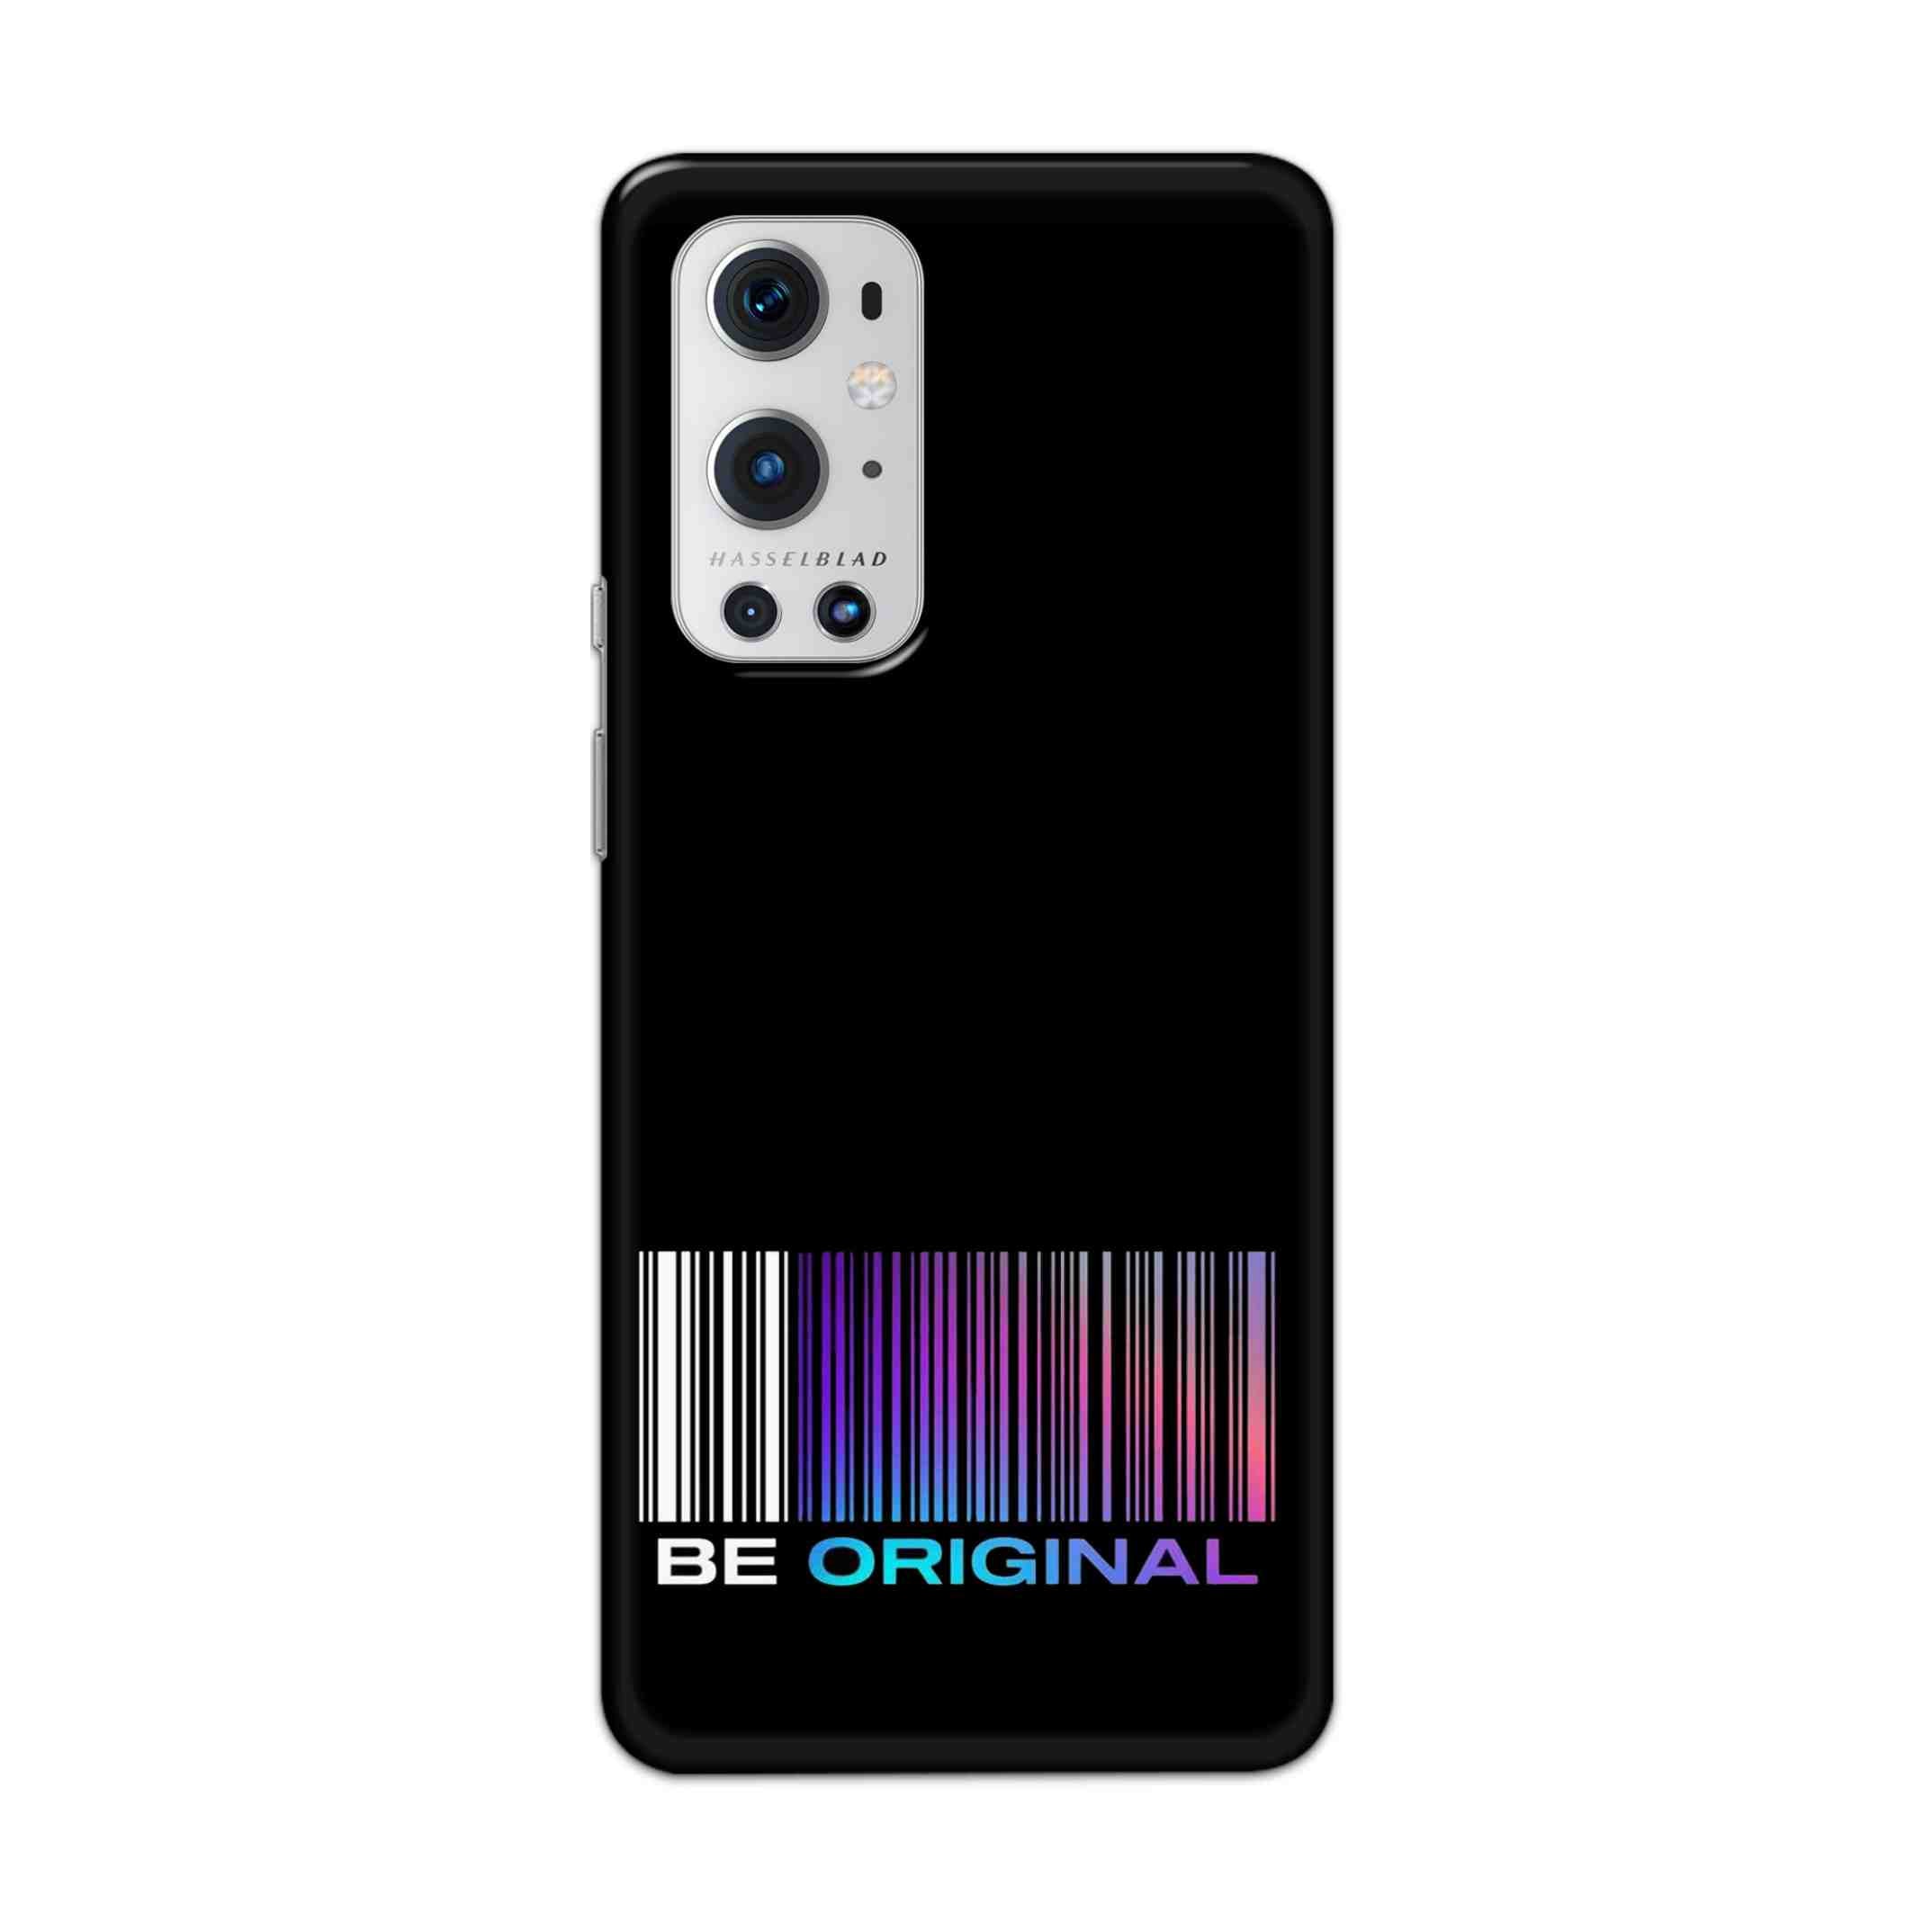 Buy Be Original Hard Back Mobile Phone Case Cover For OnePlus 9 Pro Online